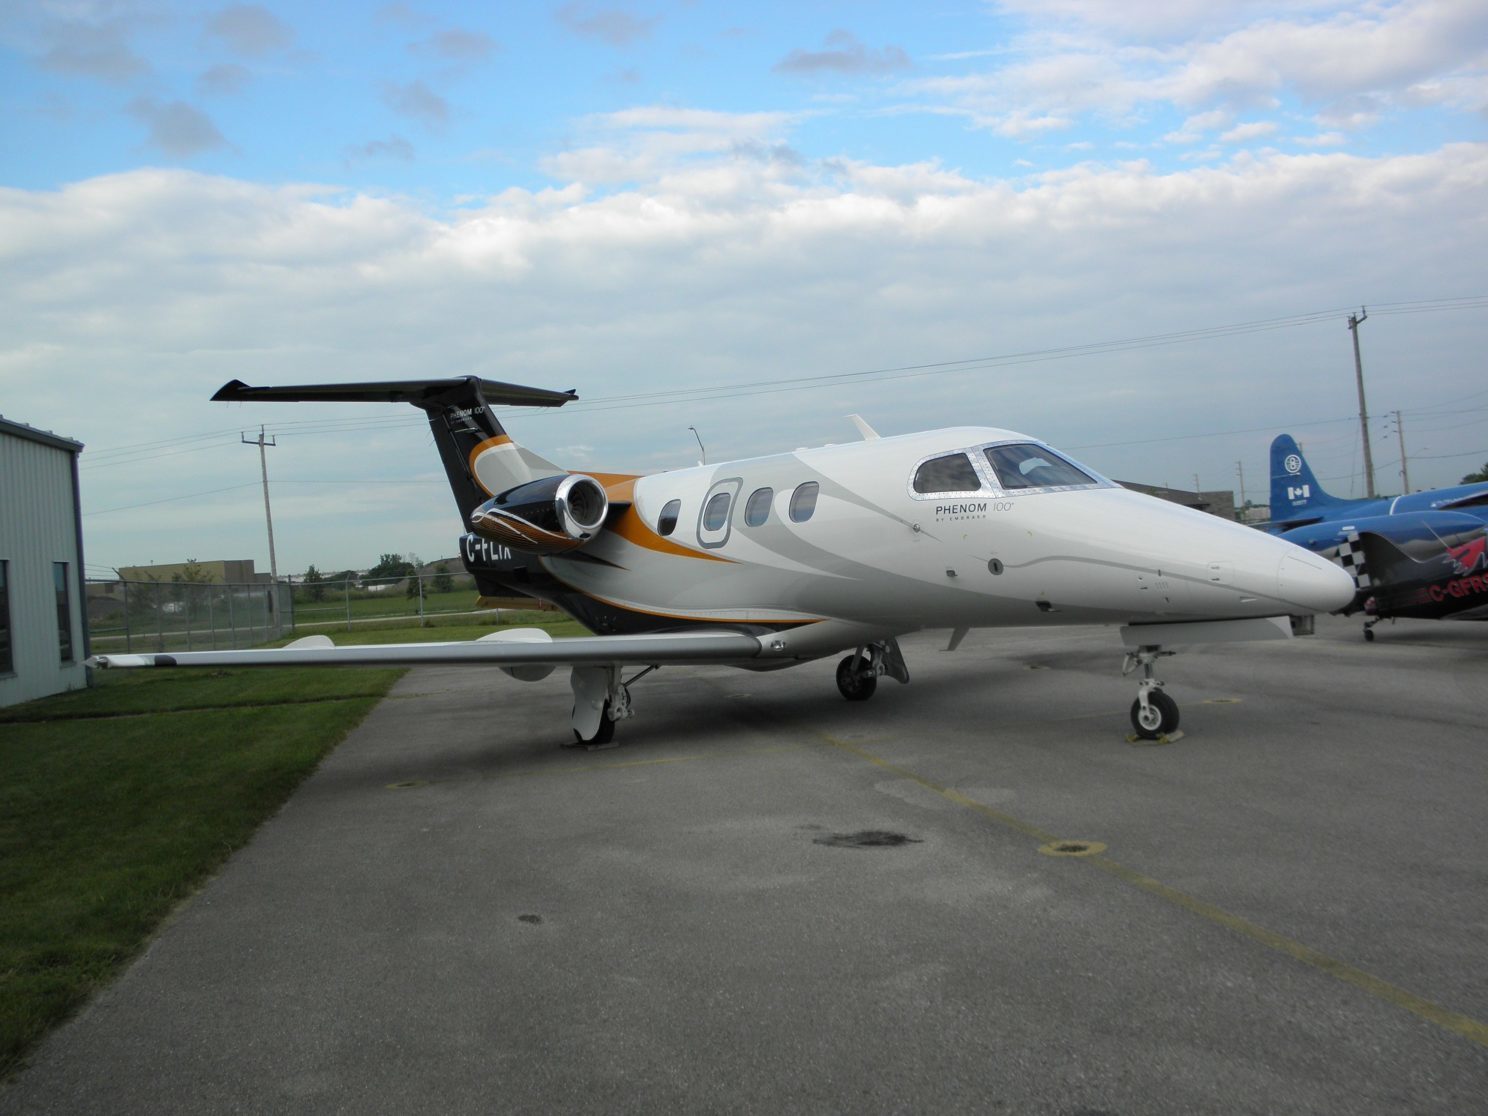 Black and white Embraer Phenom 100 aircraft at ITPS Canada